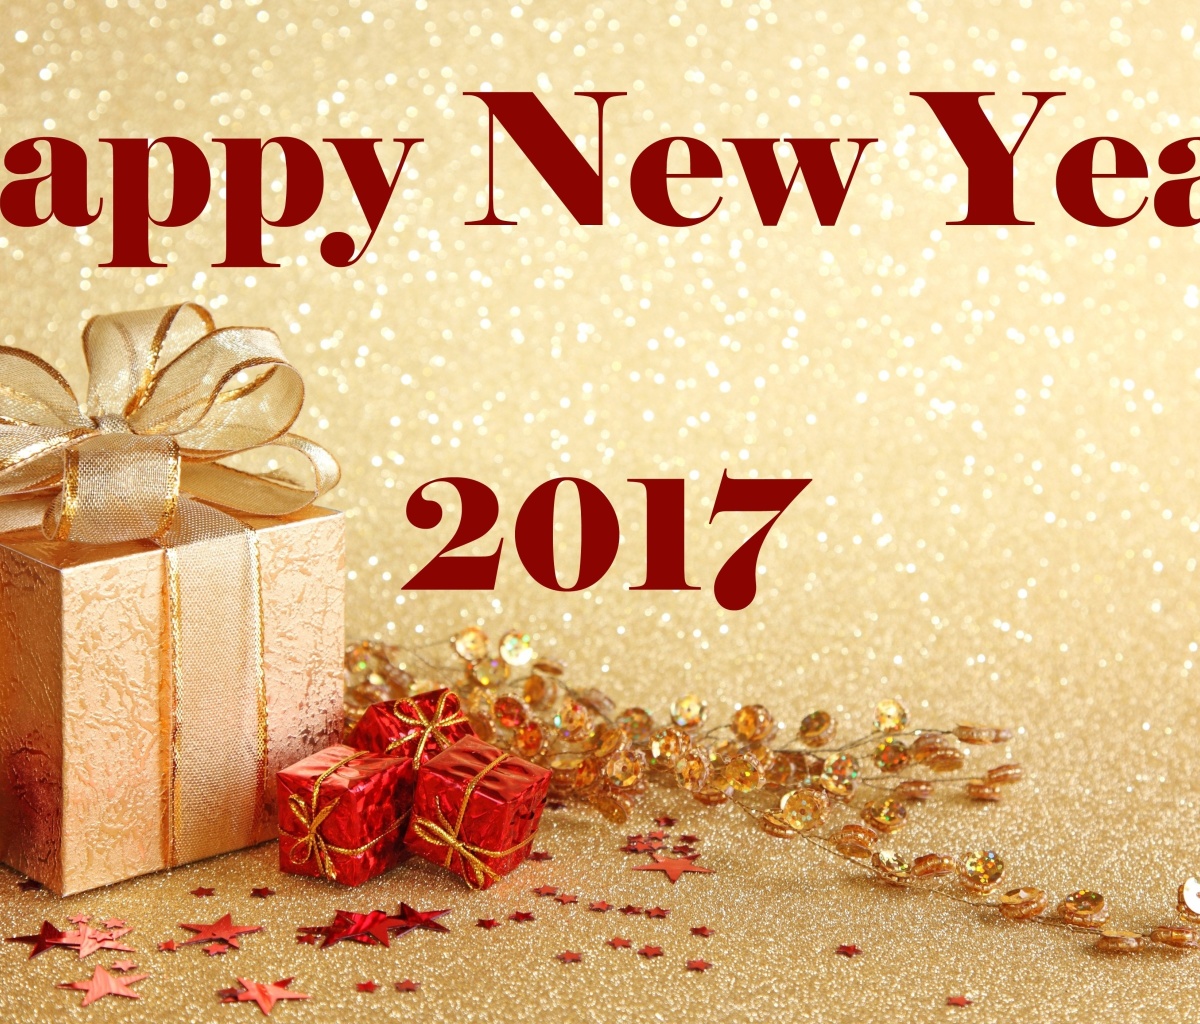 Happy New Year 2017 with Gifts wallpaper 1200x1024